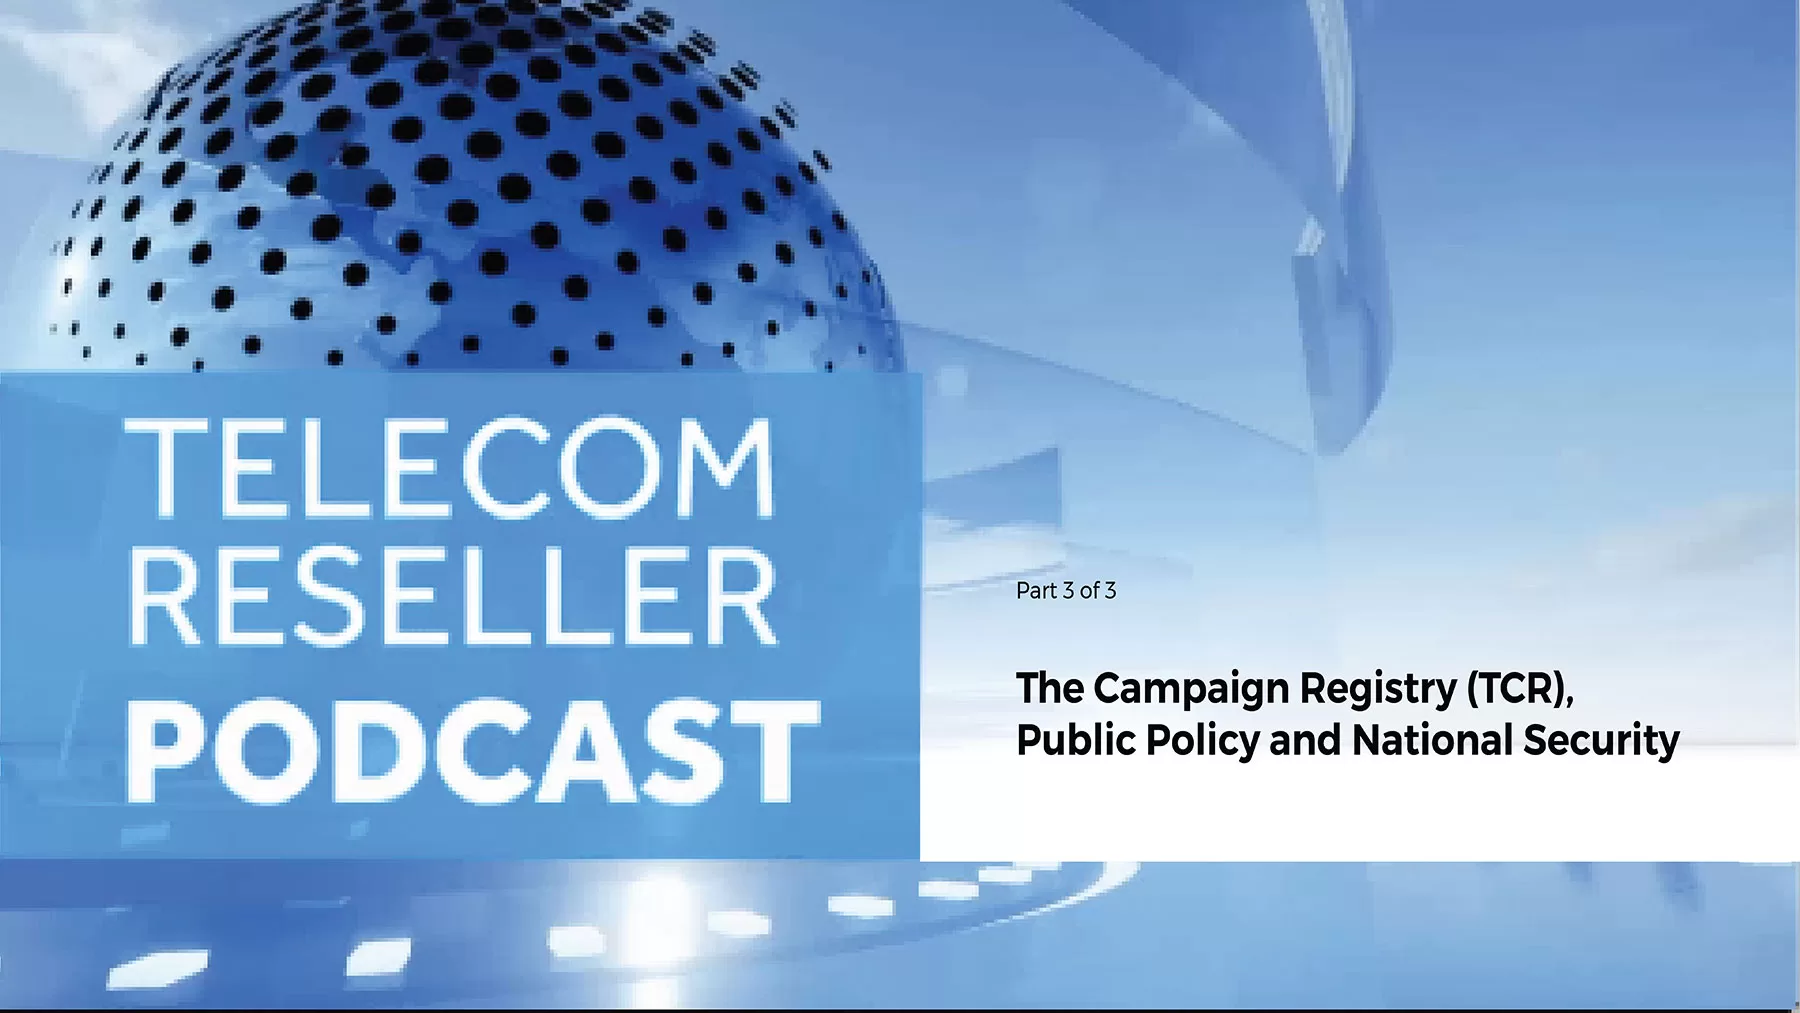 Telecom Reseller Podcast title card for part 3 of 3 series